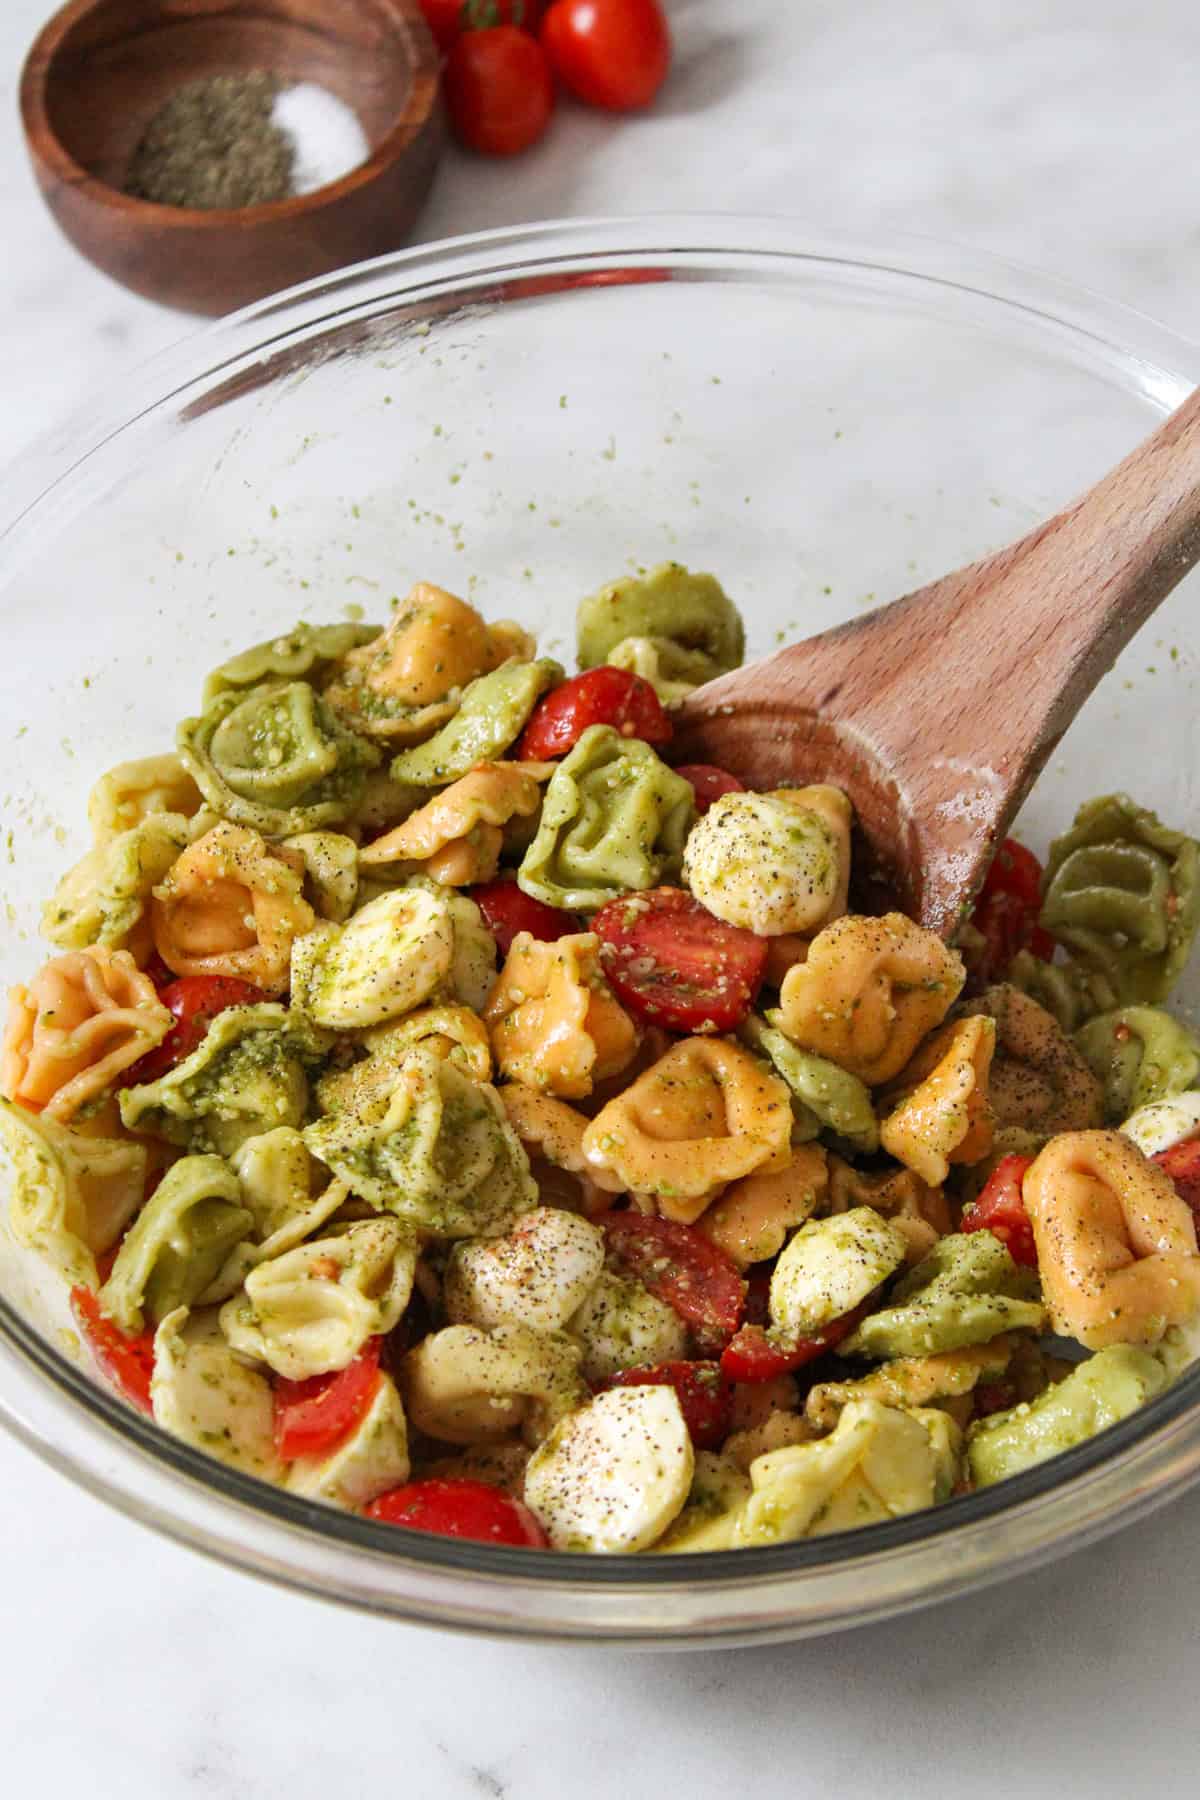 Caprese Tortellini Salad dressed in pesto in a glass bowl with a wooden spoon